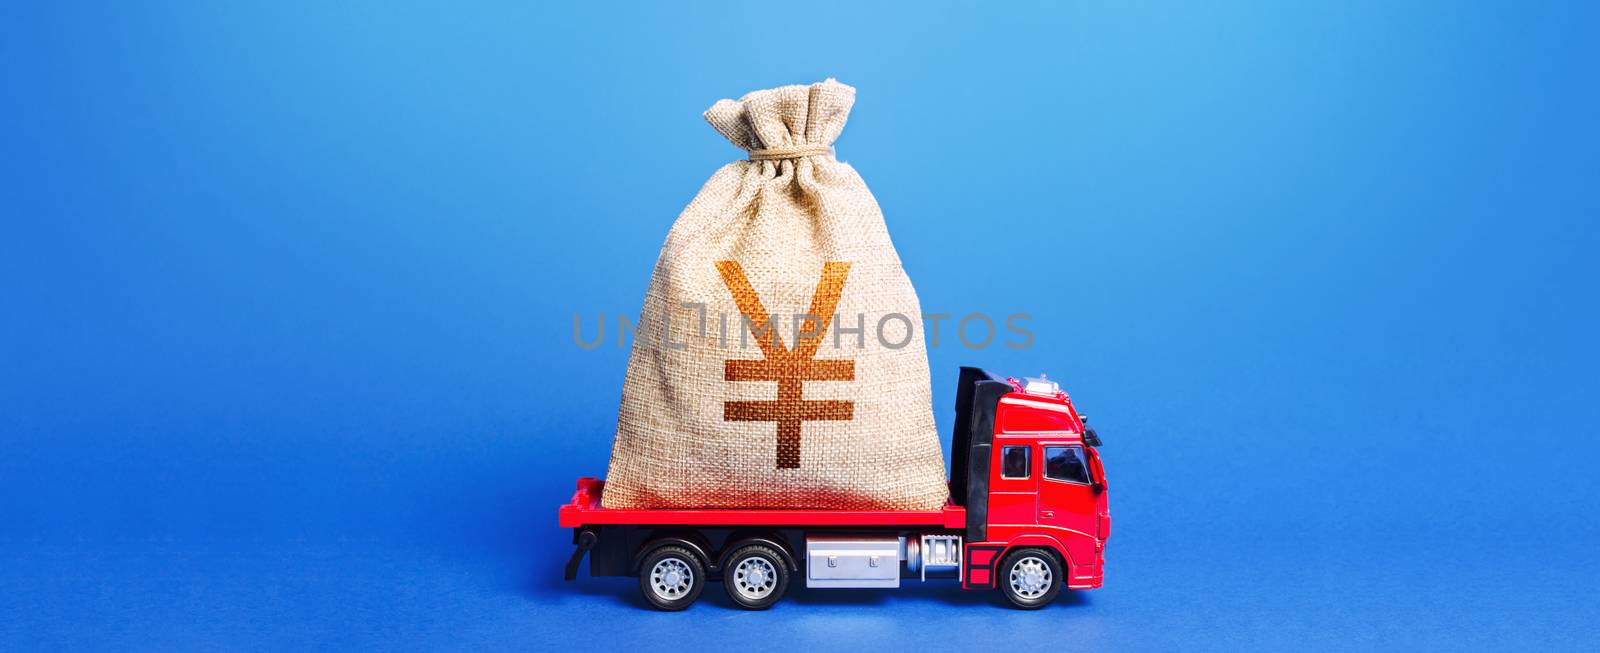 The truck is carrying a huge Yen Yuan money bag. Great investment. Anti-crisis measures of government. Attracting large funds to the economy for subsidies, support and cheap soft loans for businesses. by iLixe48